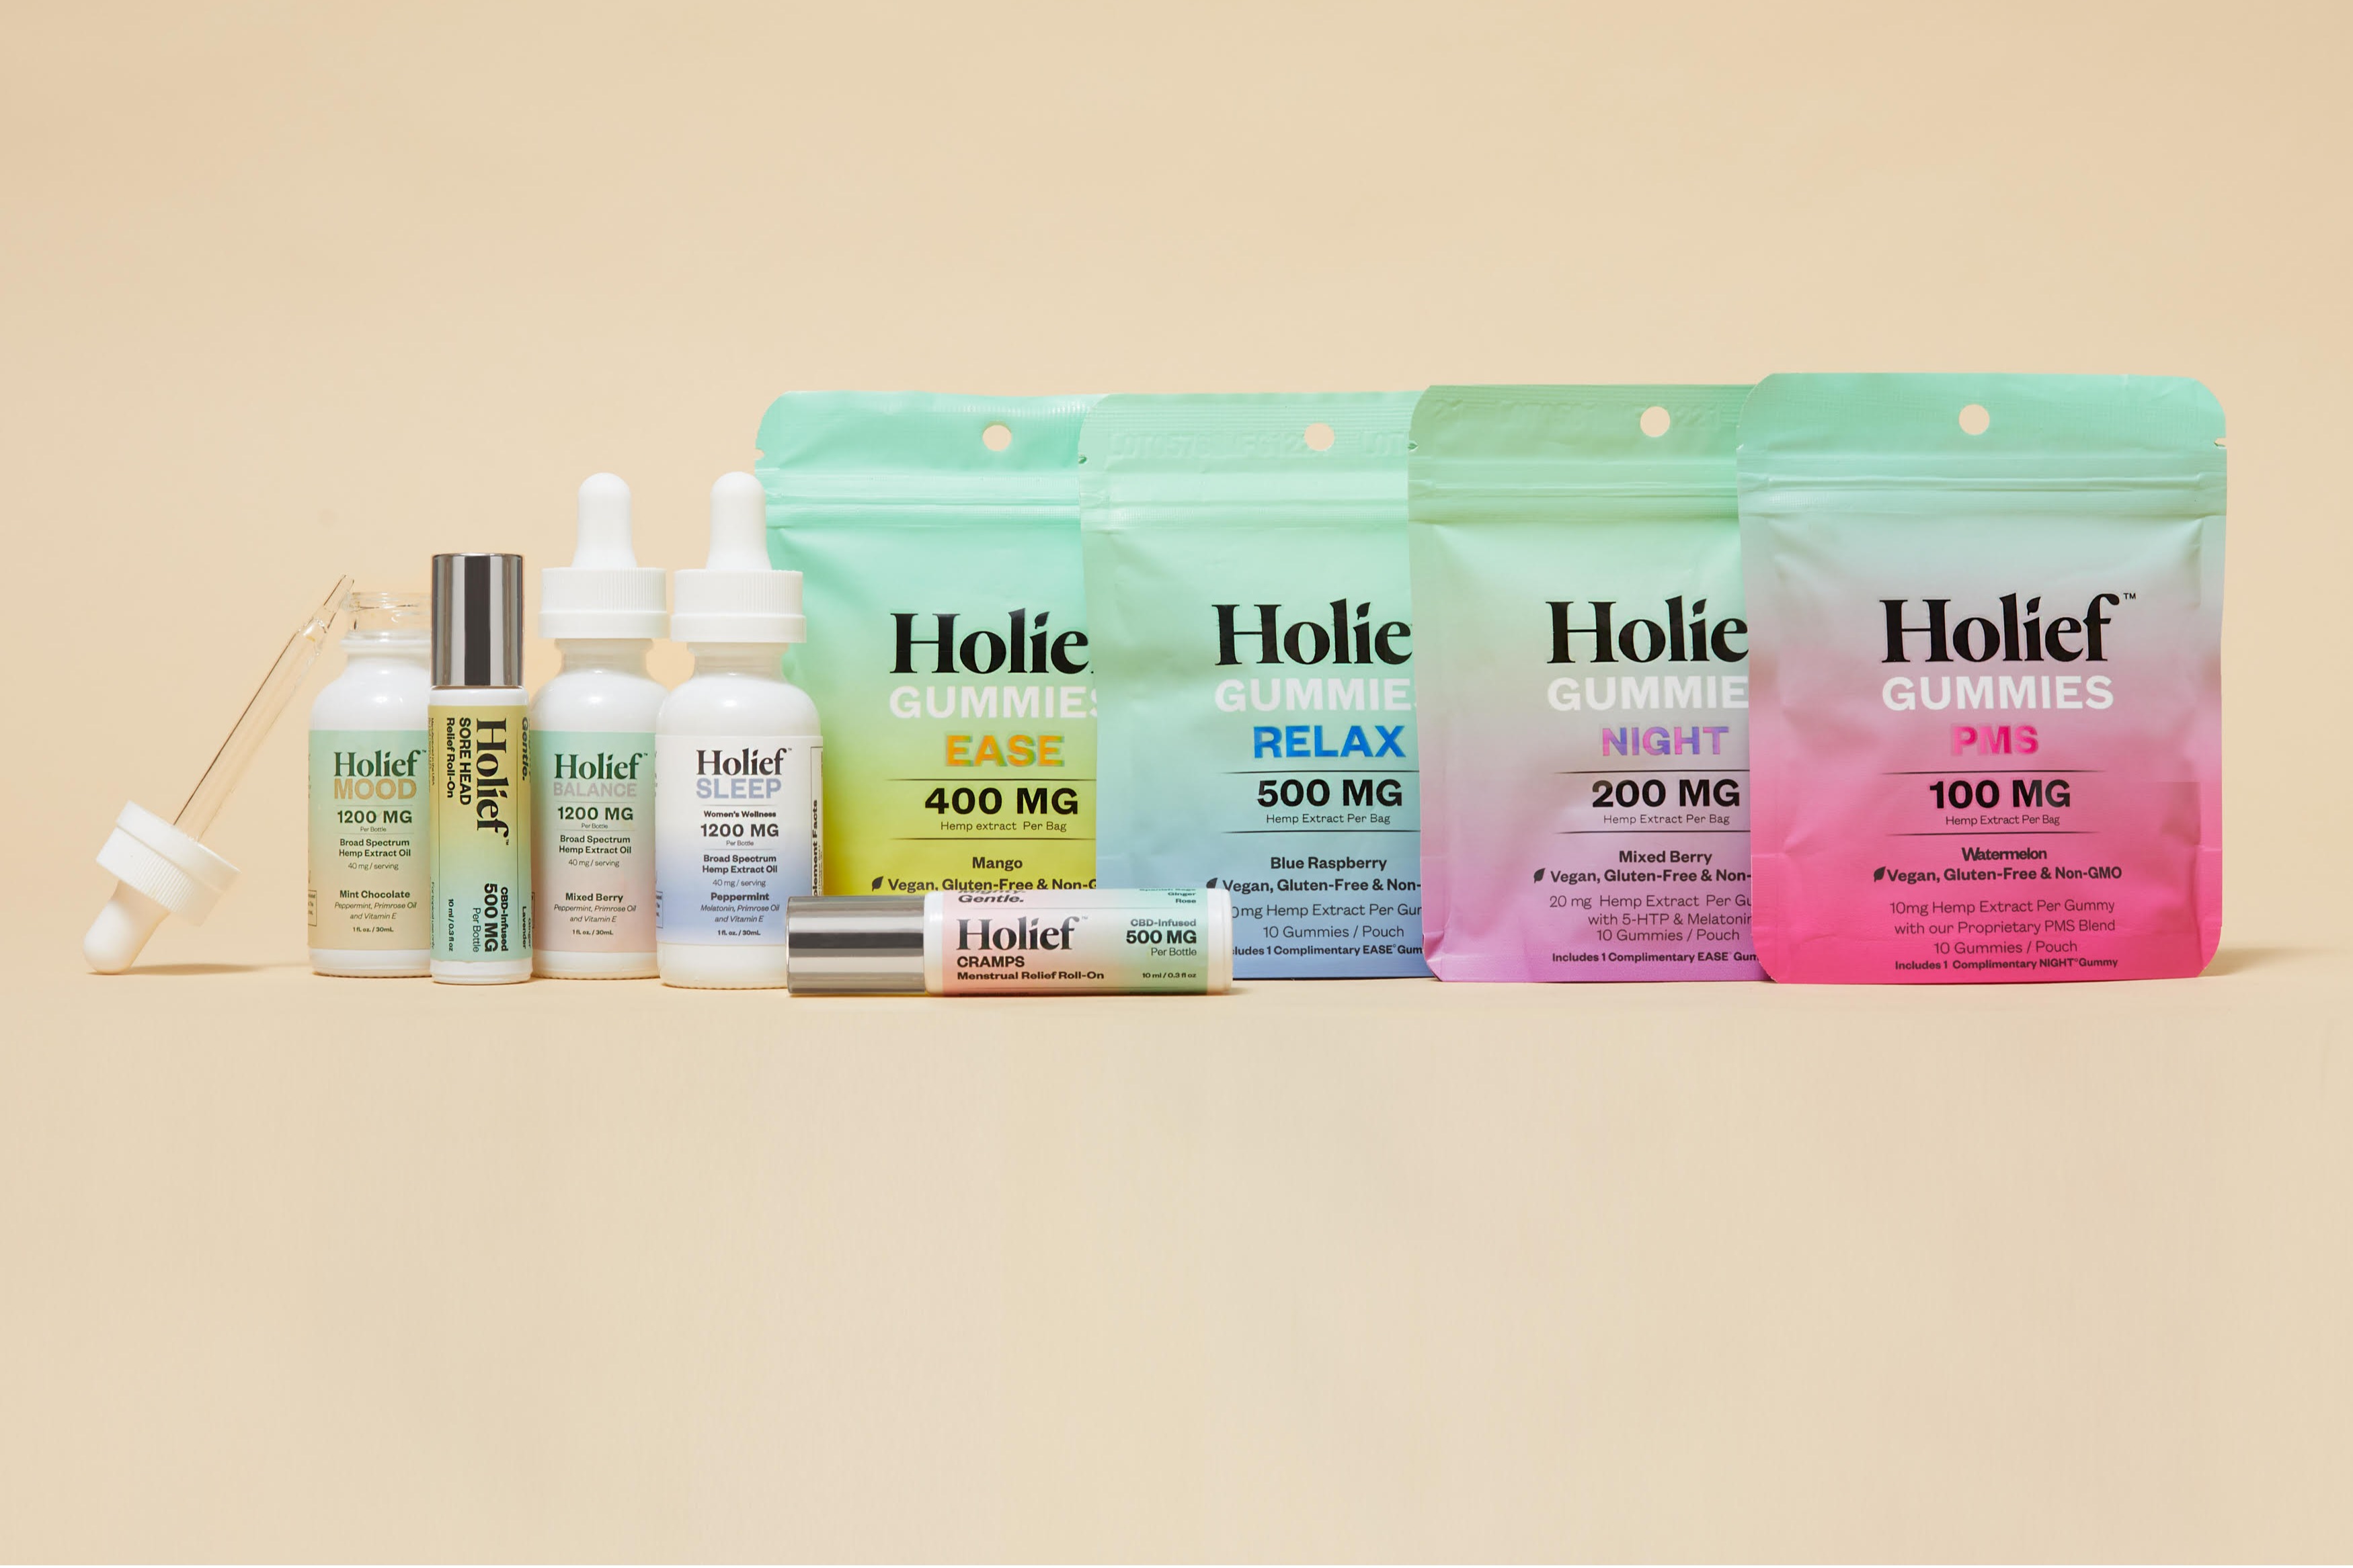 Holief - A holistic approach to health and wellness. (Tinctures, Capsules, Topicals, Gummies) 190